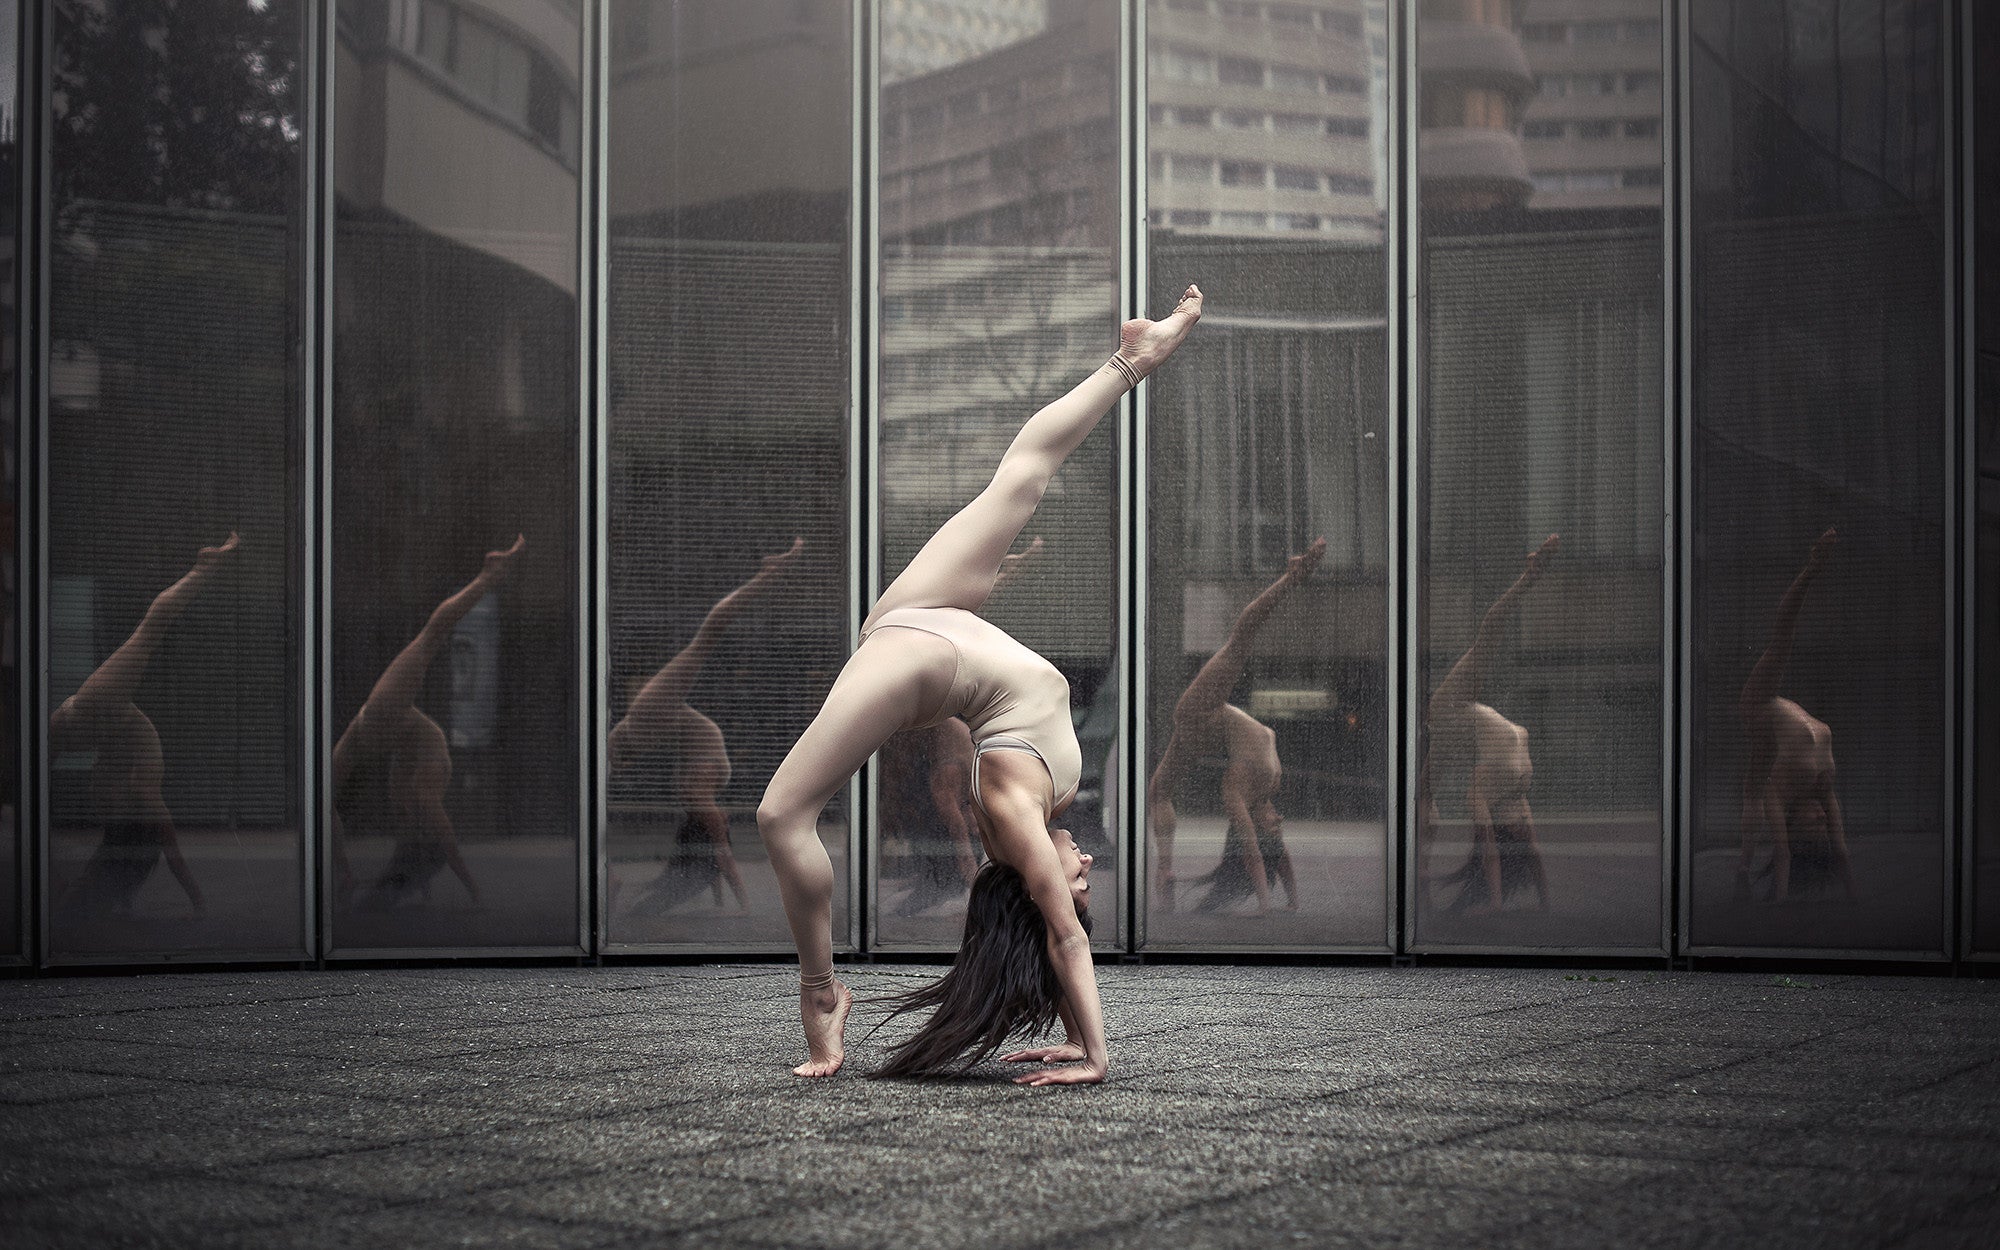 Art Dance Photography Prints - Purchase Online the artwork: Mirrors by Dimitry Roulland